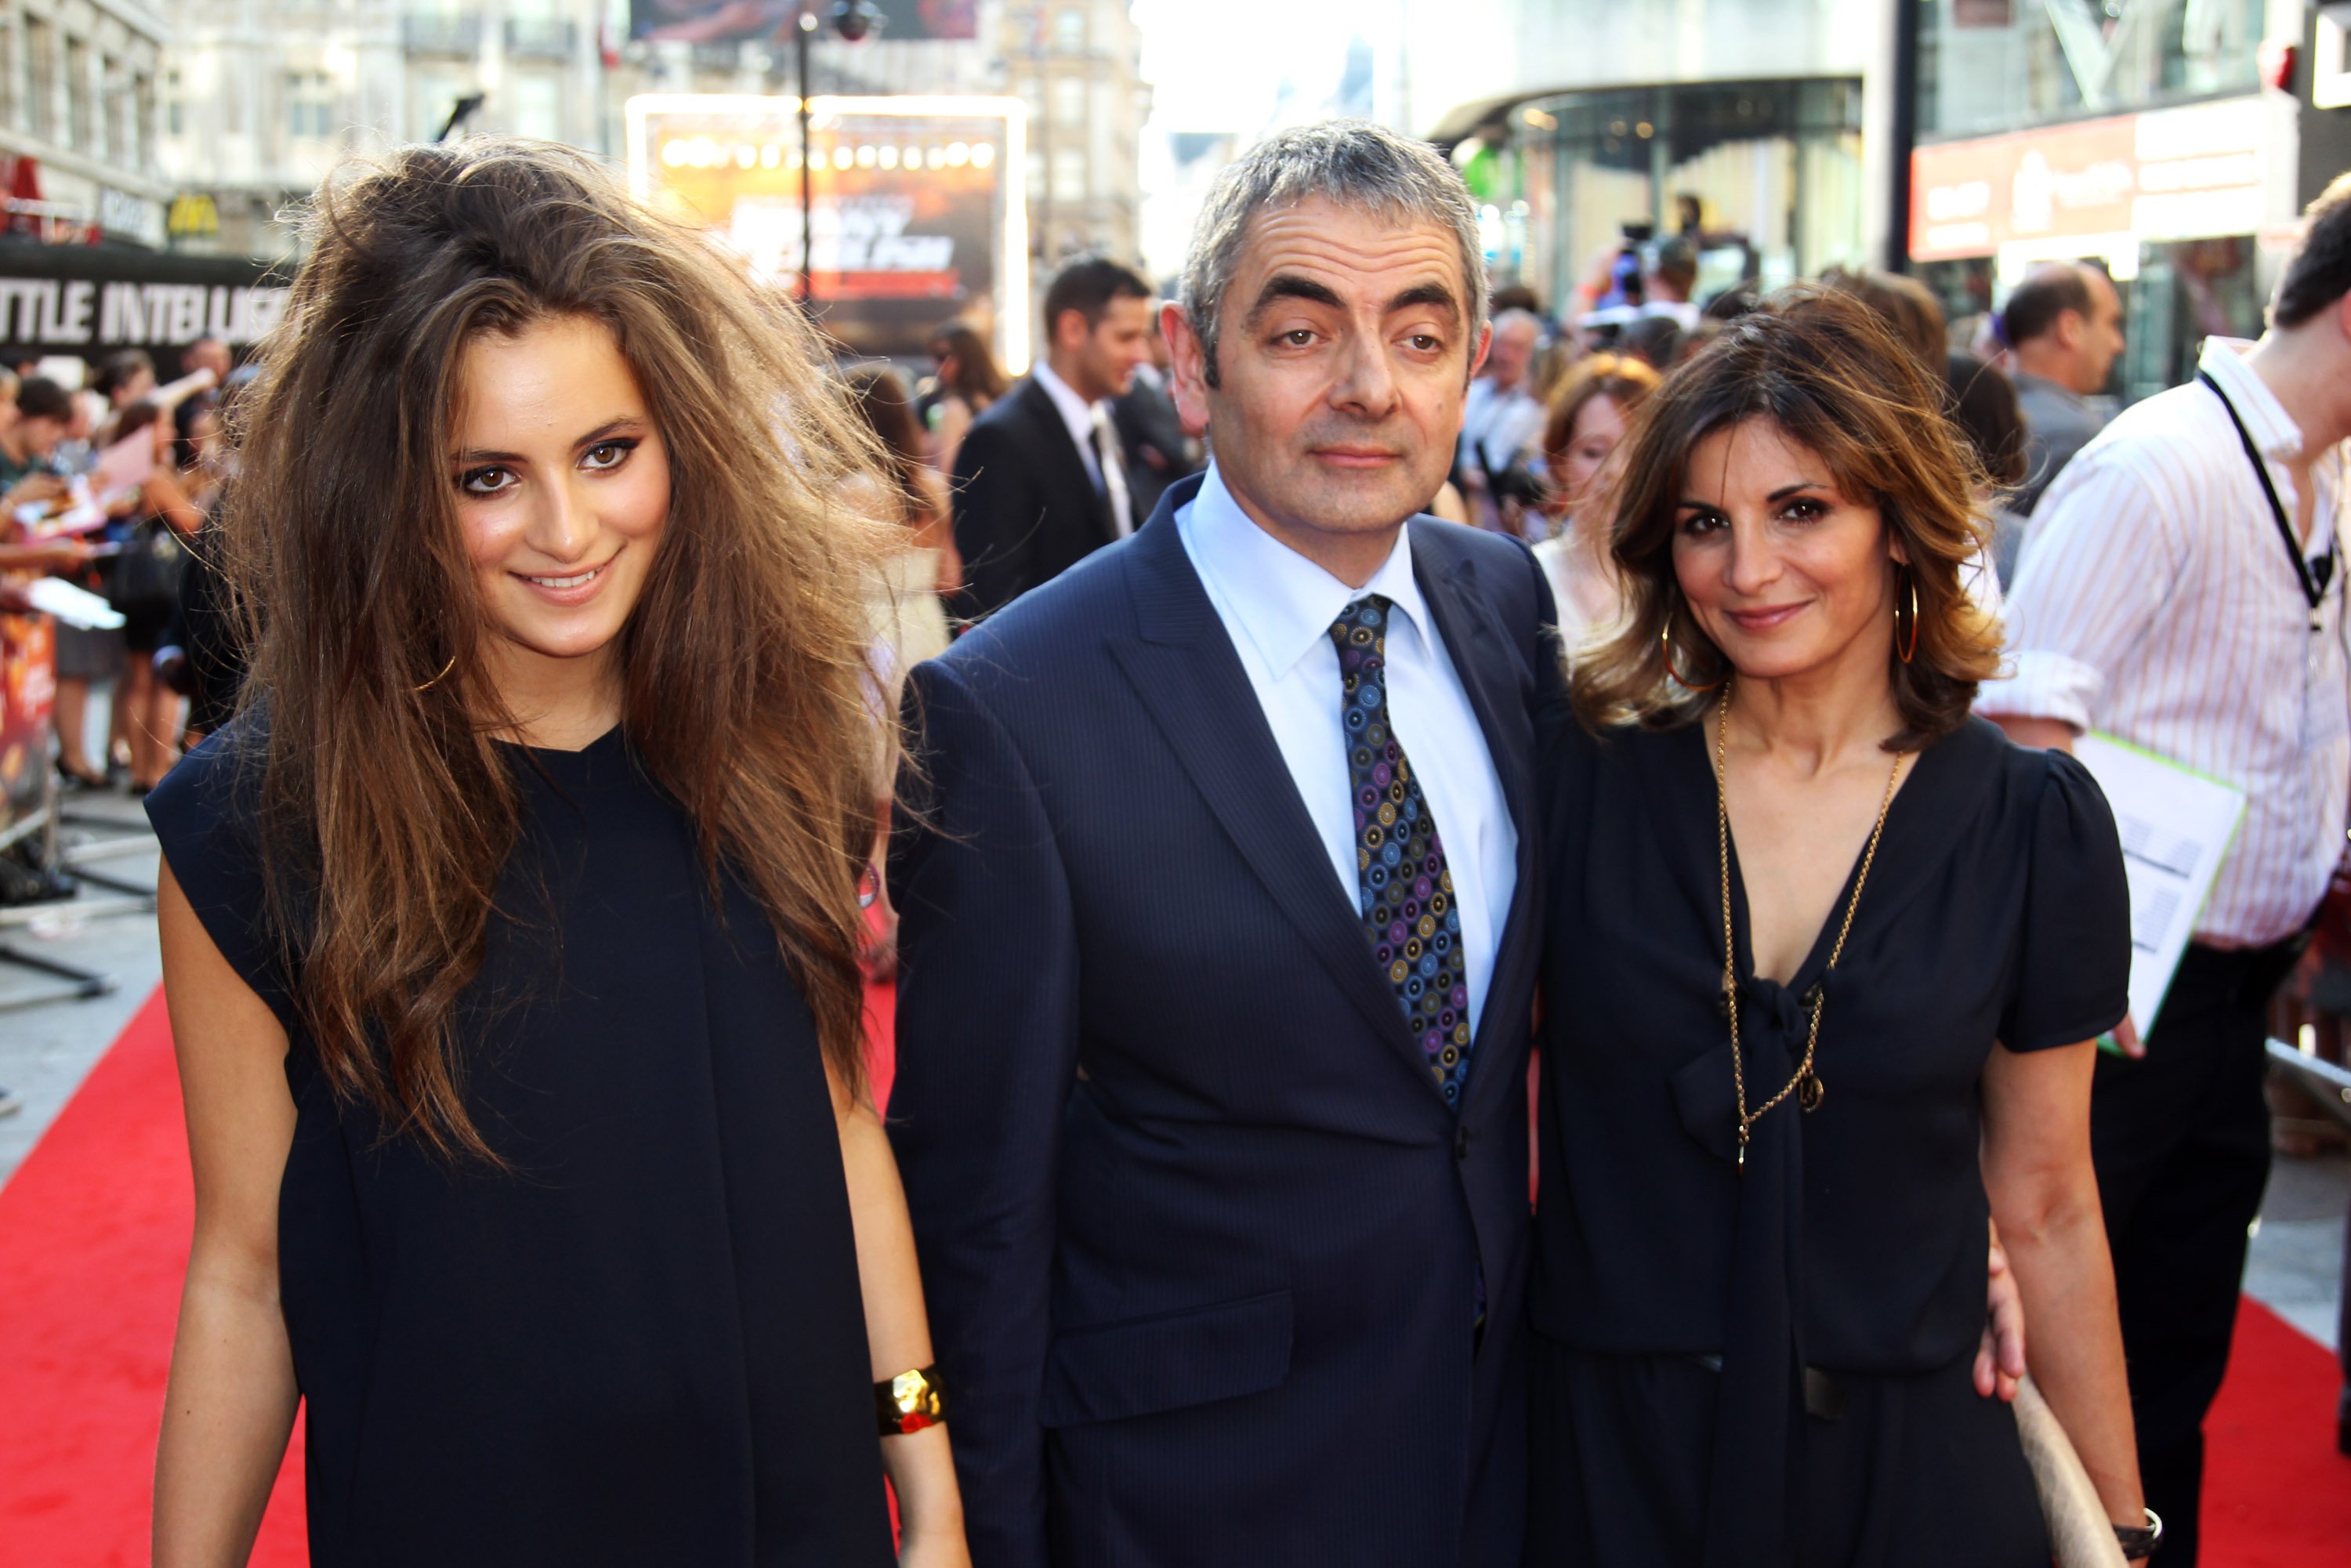 Lily Atkinson and her parents Rowan Atkinson and Sunetra Sastry attend the premiere of "Johnny English Reborn" on October 2, 2011, in London, United Kingdom. | Source: Getty Images